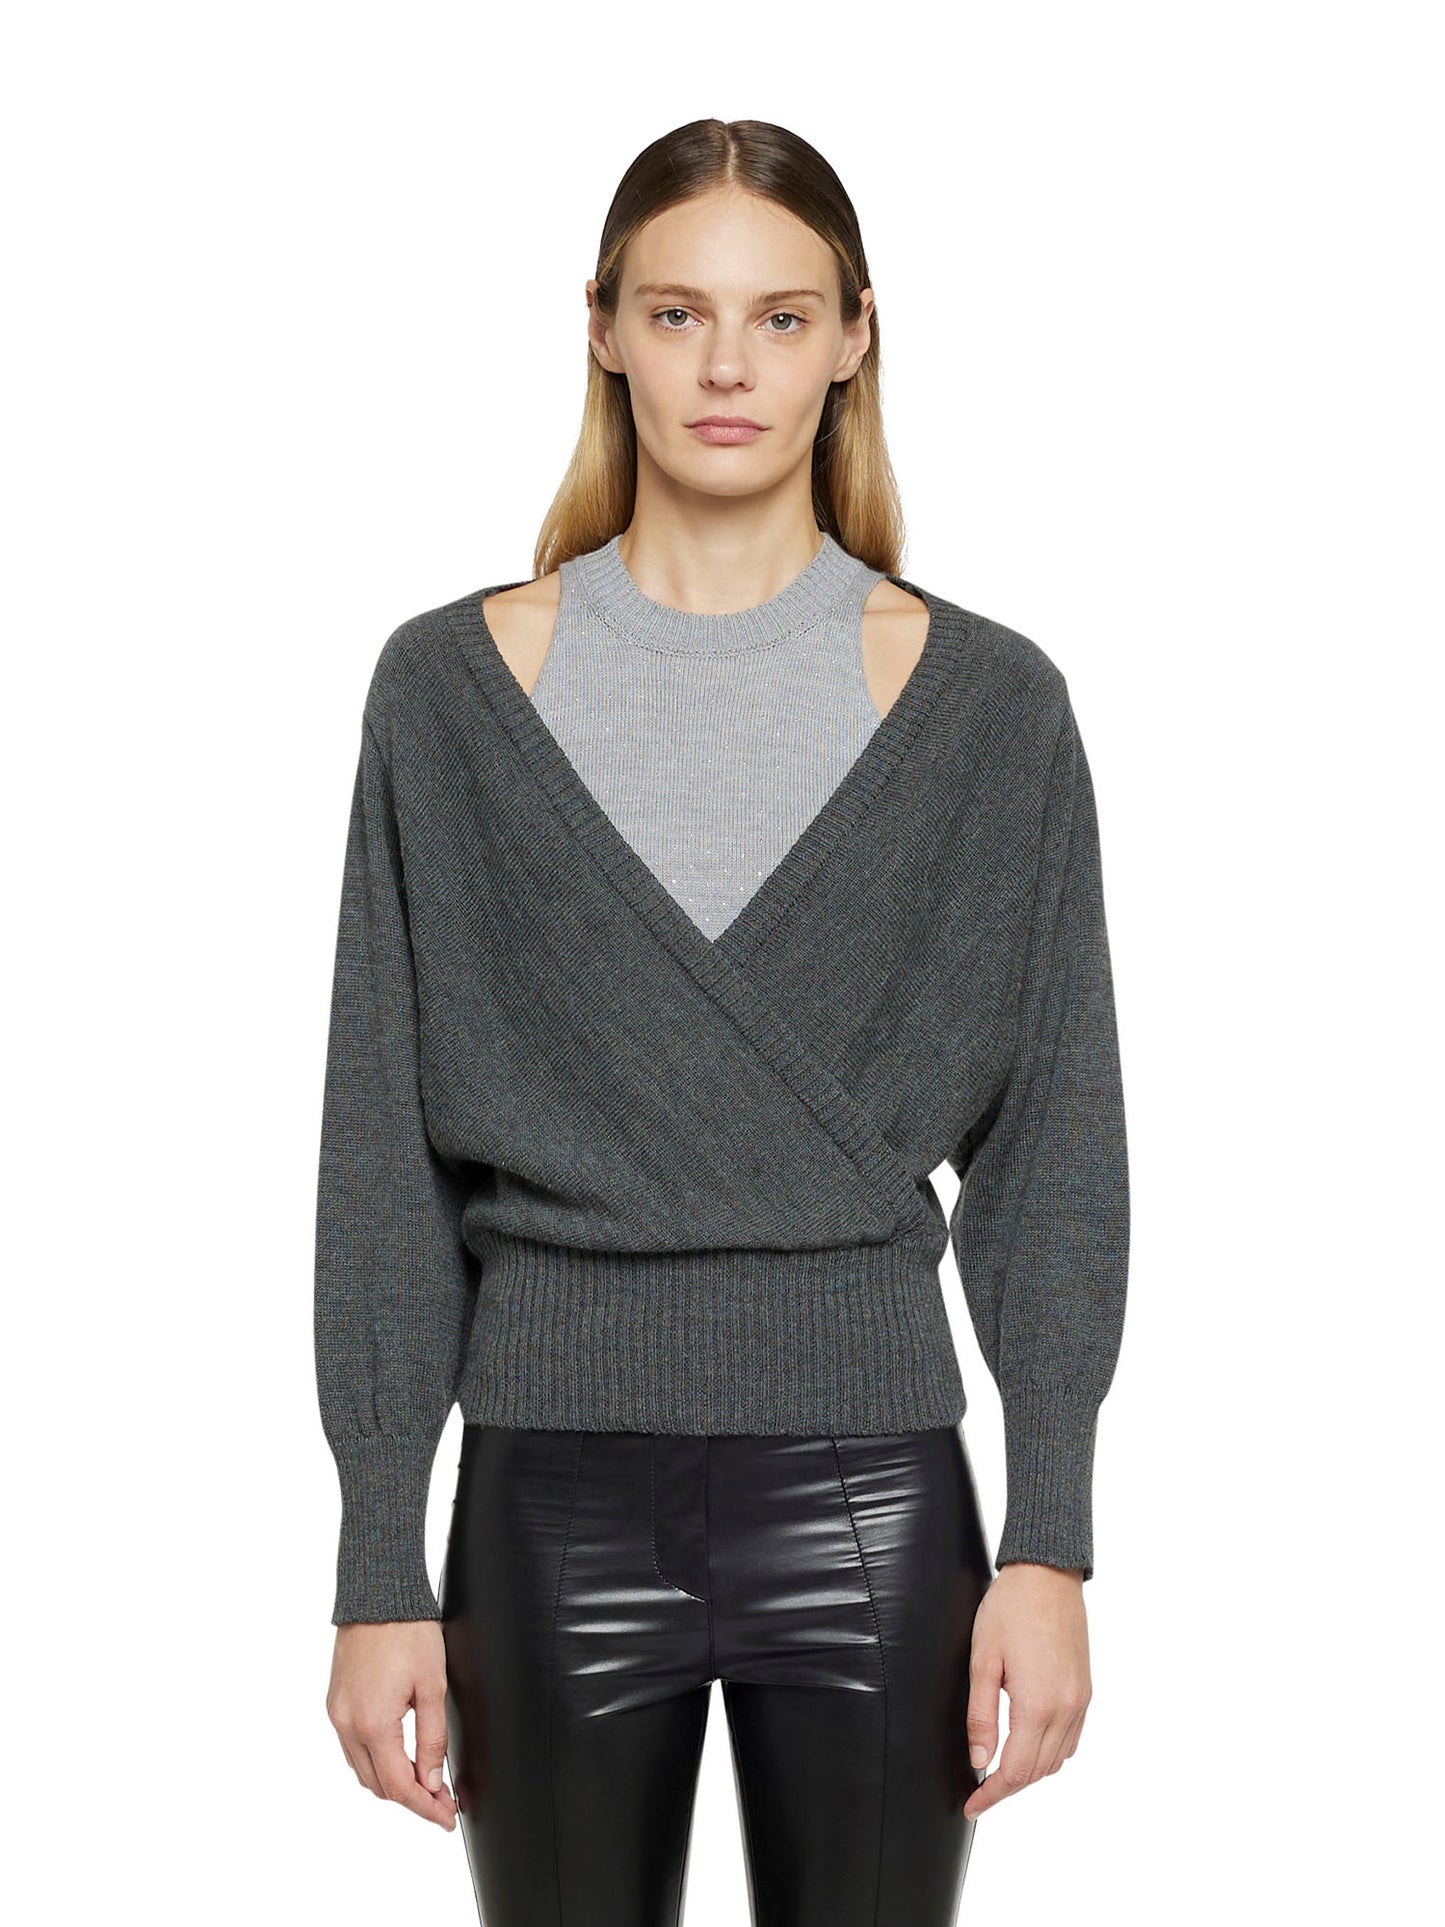 Wool-blend criss-cross sweater with micro studs